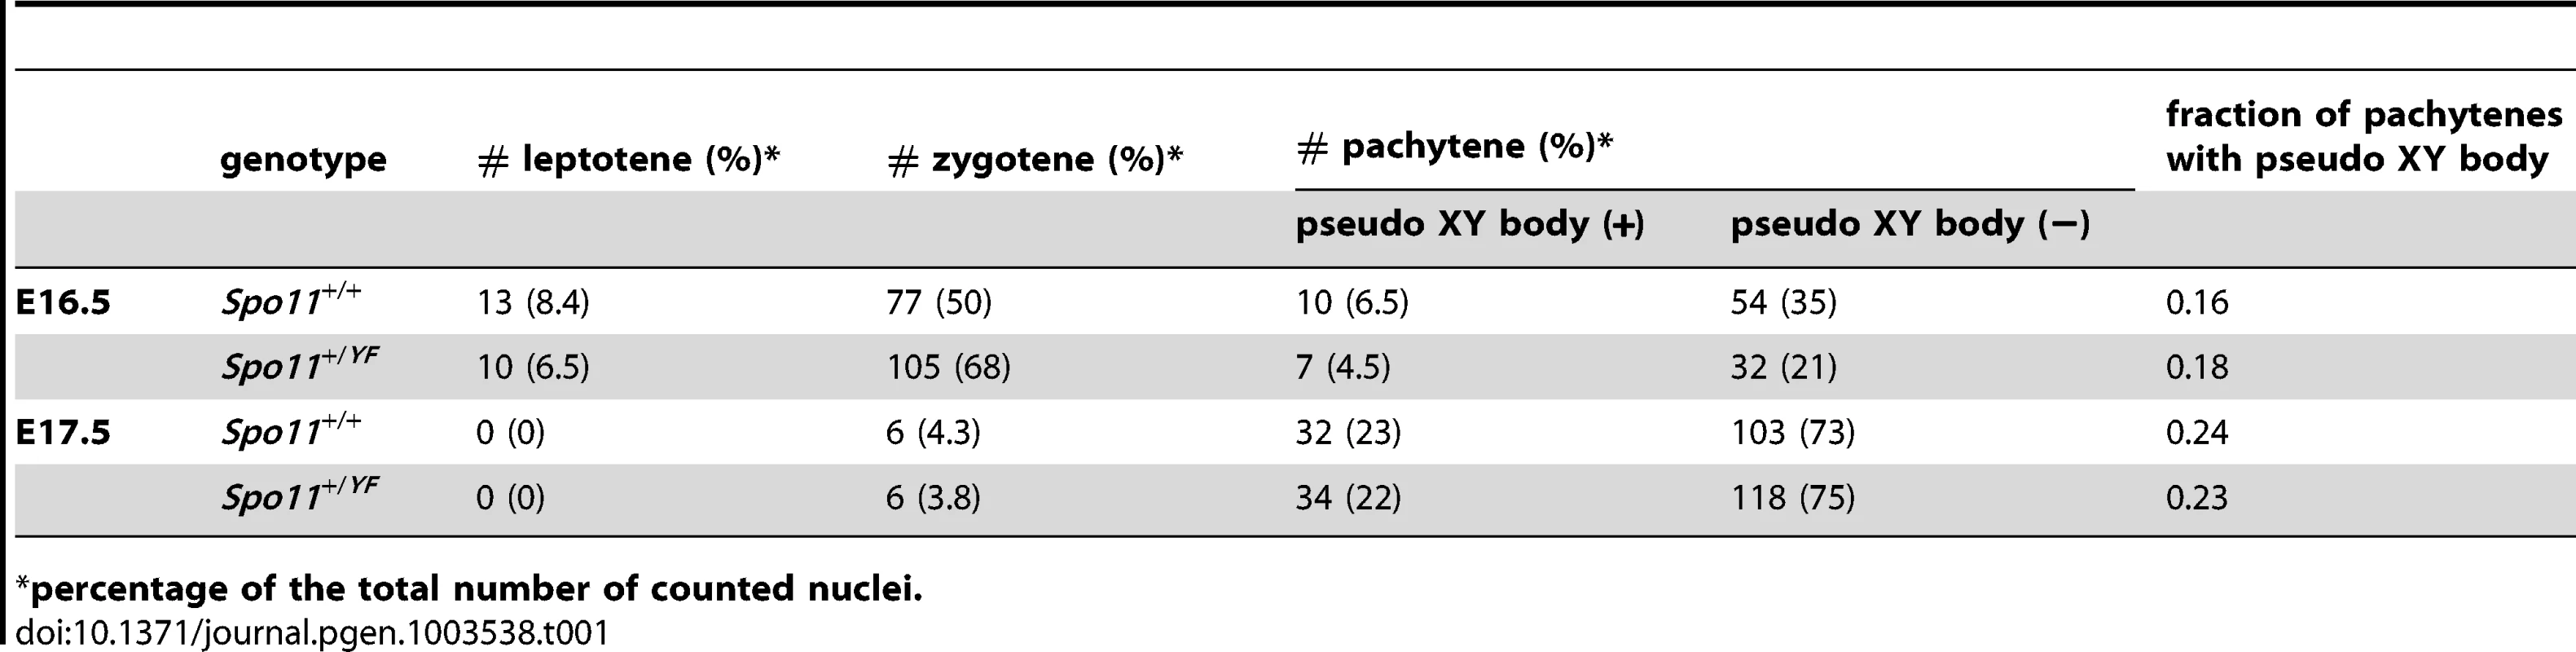 Number of different subtypes of meiotic nuclei and frequency of pachytene nuclei with a pseudo-XY body in E16.5 and E17.5 oocytes from <i>Spo11<sup>+/+</sup></i> and <i>Spo11<sup>+/YF</sup></i>embryos.